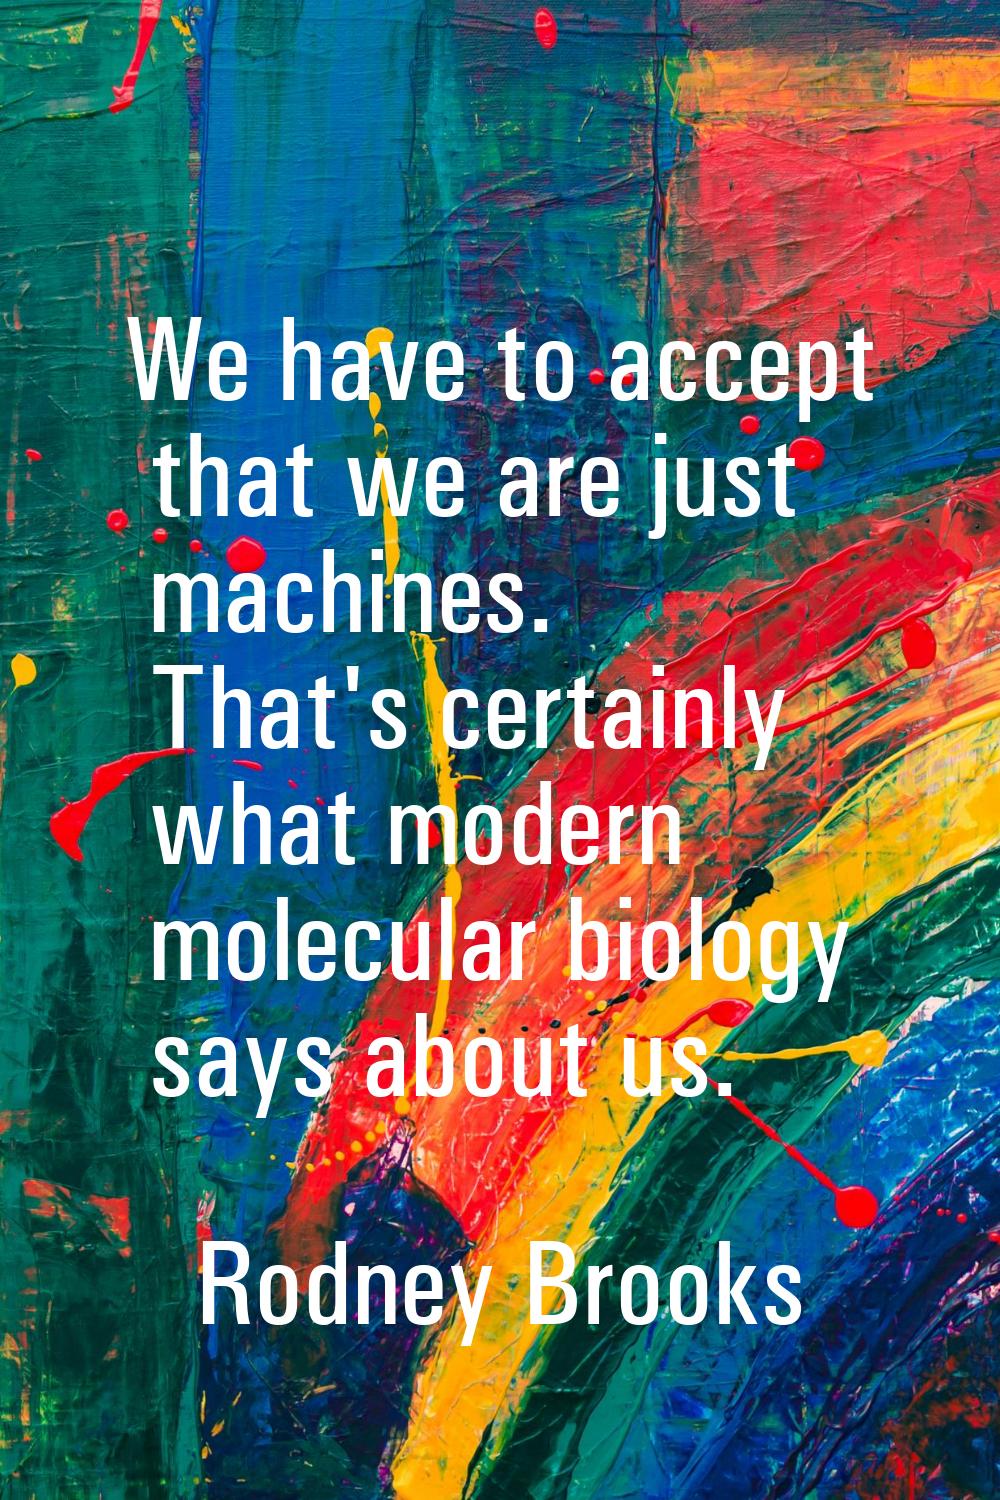 We have to accept that we are just machines. That's certainly what modern molecular biology says ab